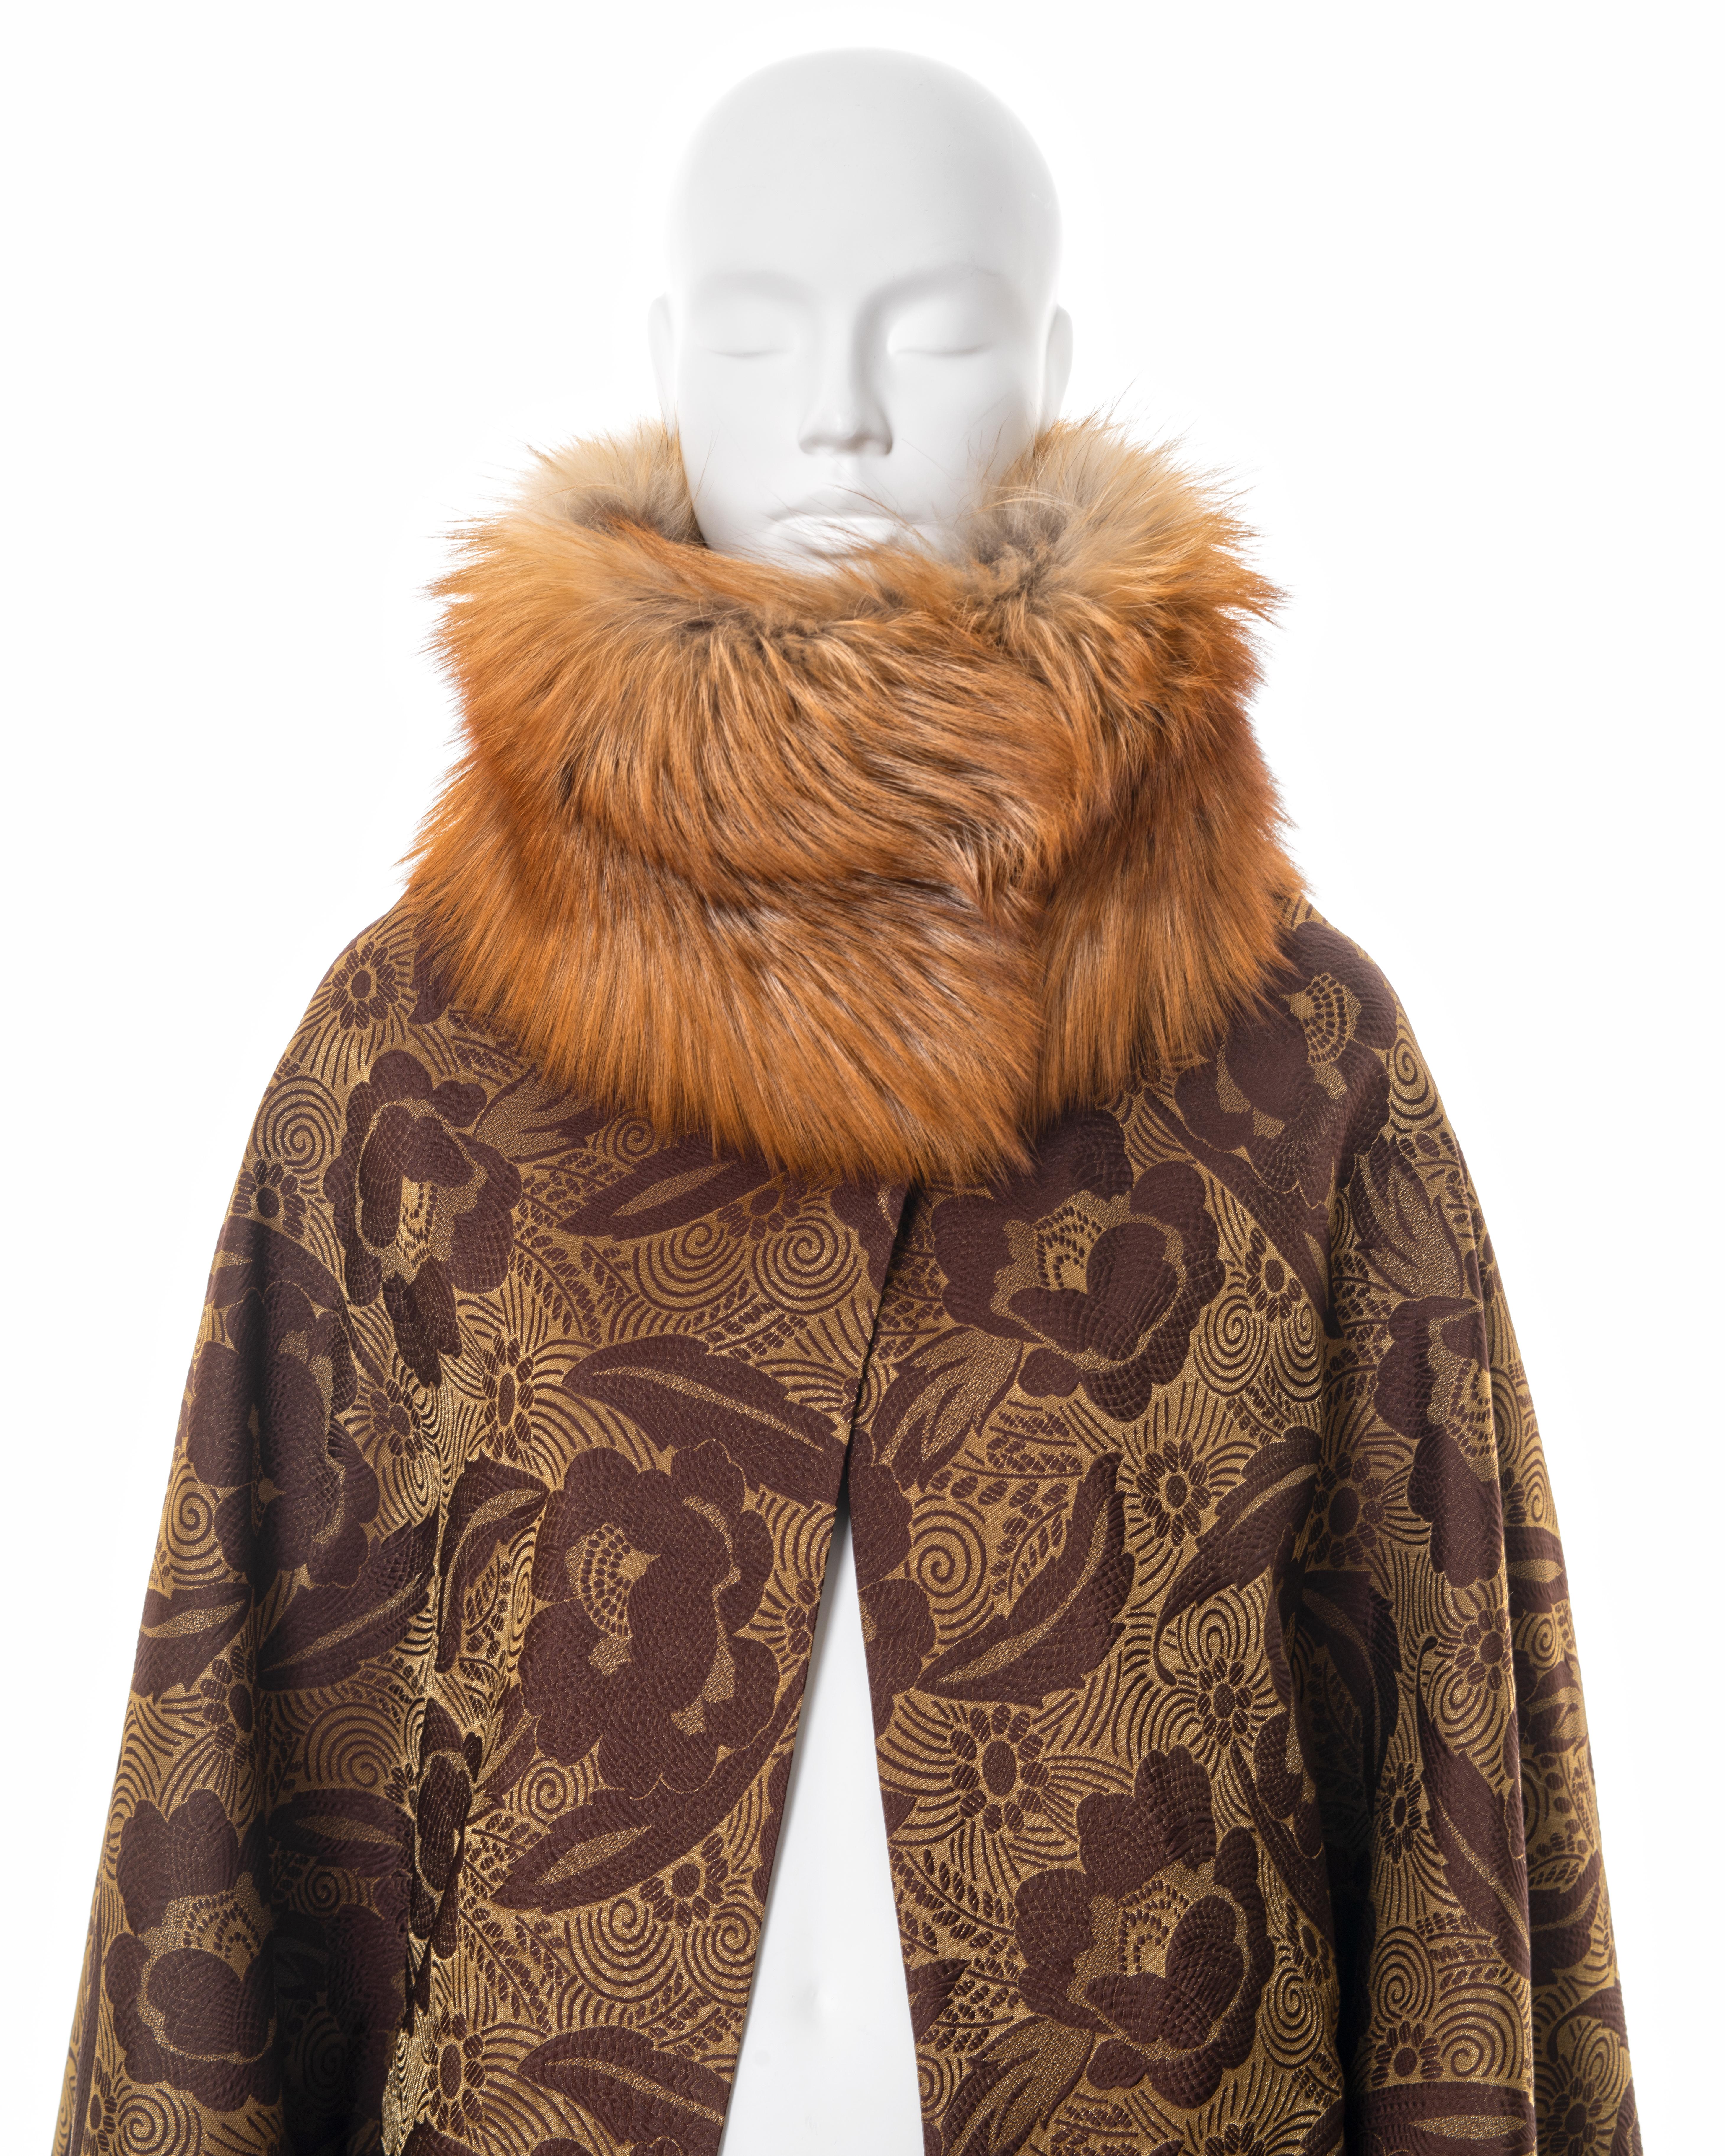 Christian Dior by John Galliano silk cocoon coat with fox fur collar, ss 2008 In Excellent Condition For Sale In London, GB